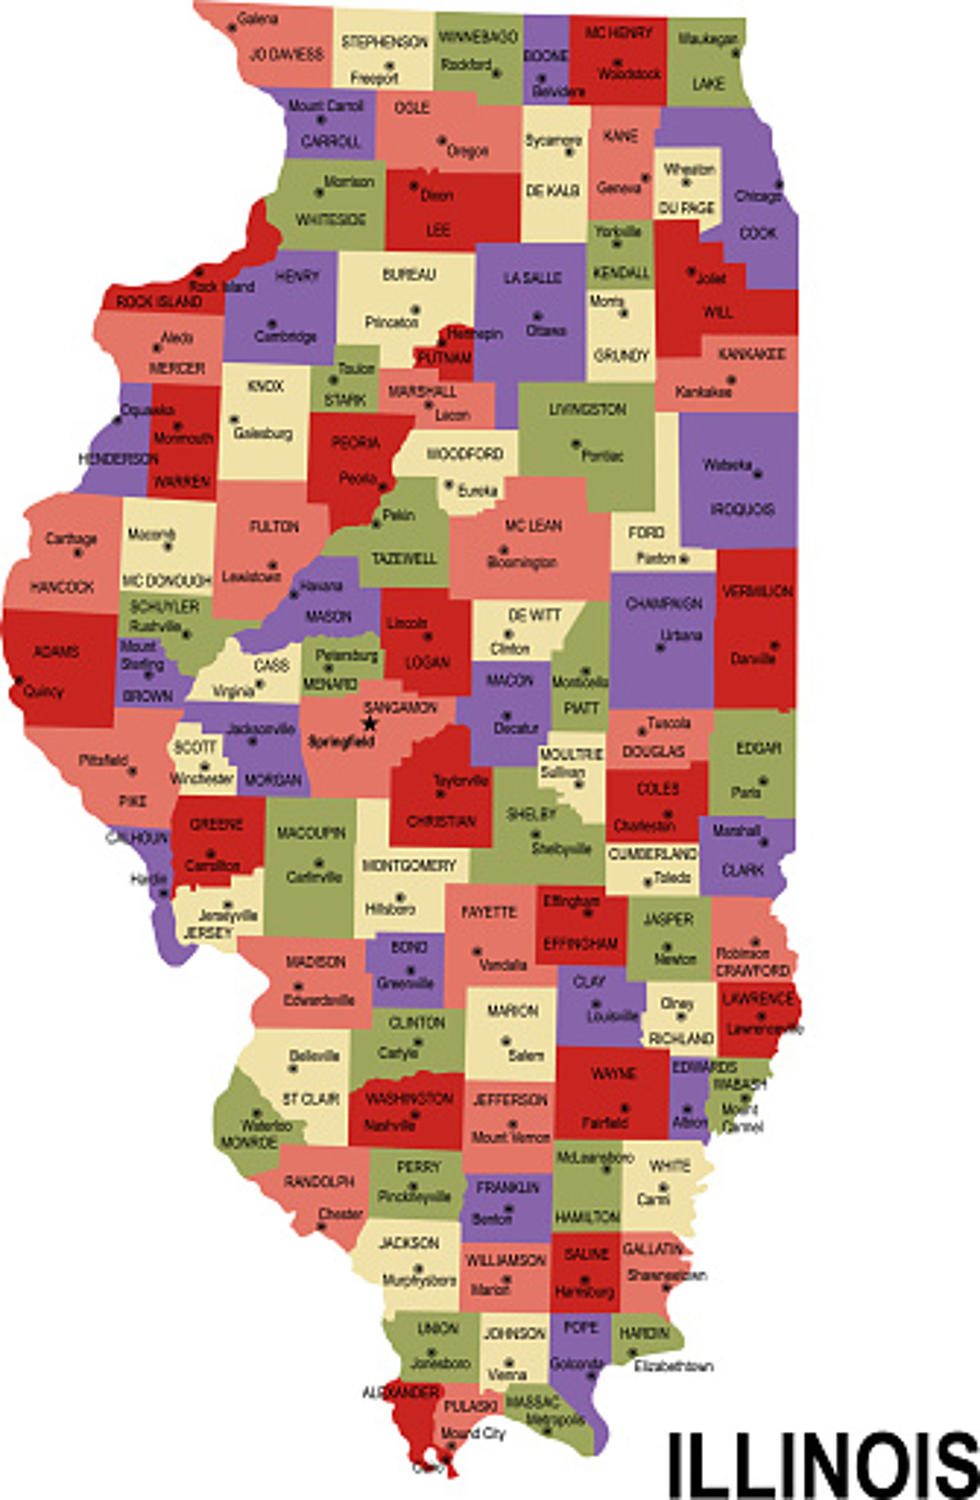 Illinois County Wants To Leave The State, Become Part Of Missouri